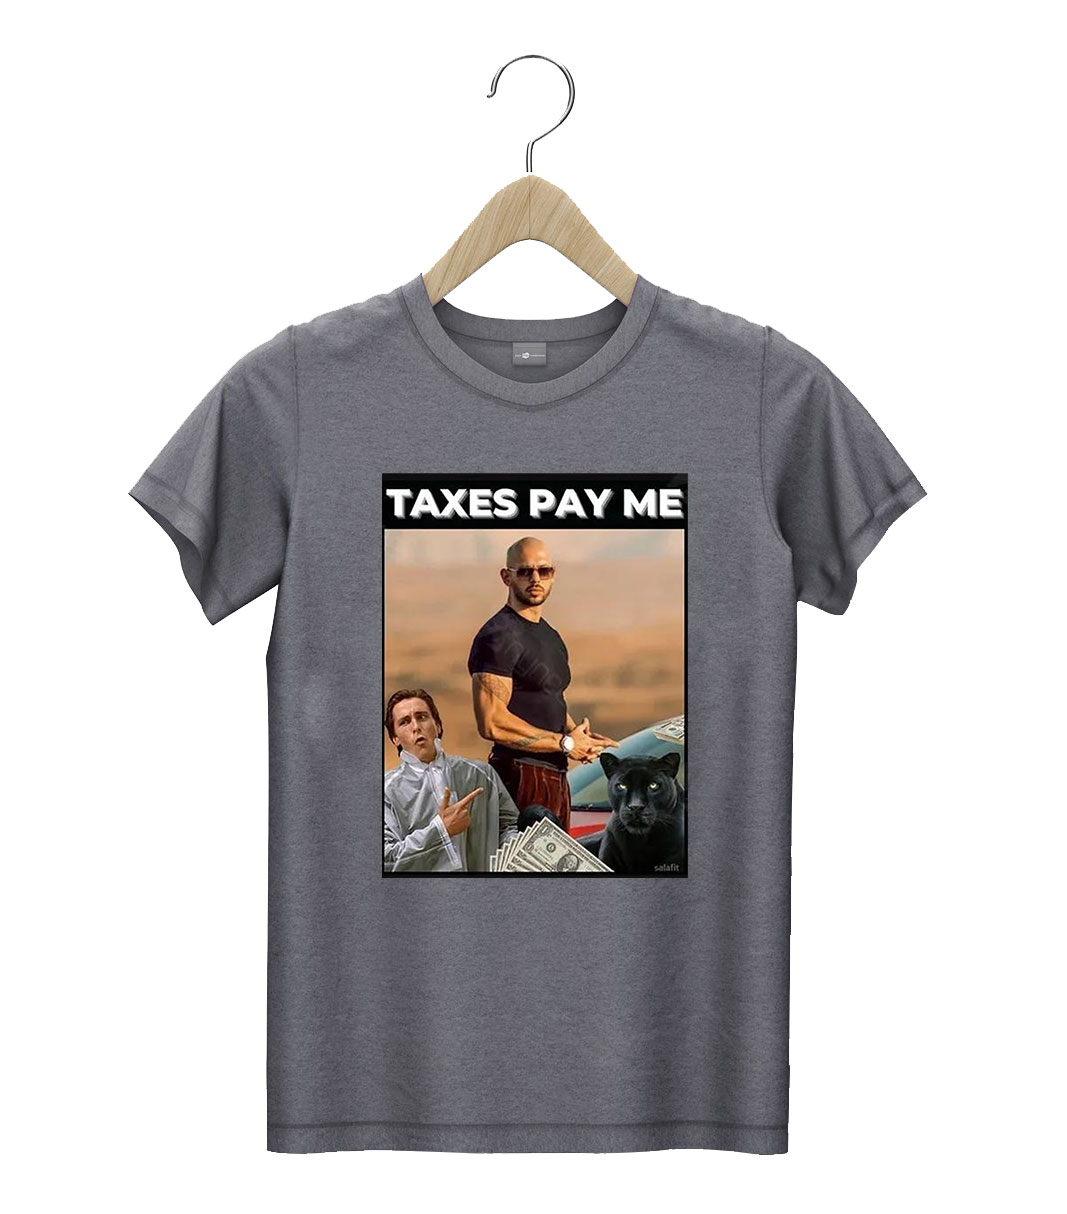 t shirt dark heather andrew tate taxes pay me 43469